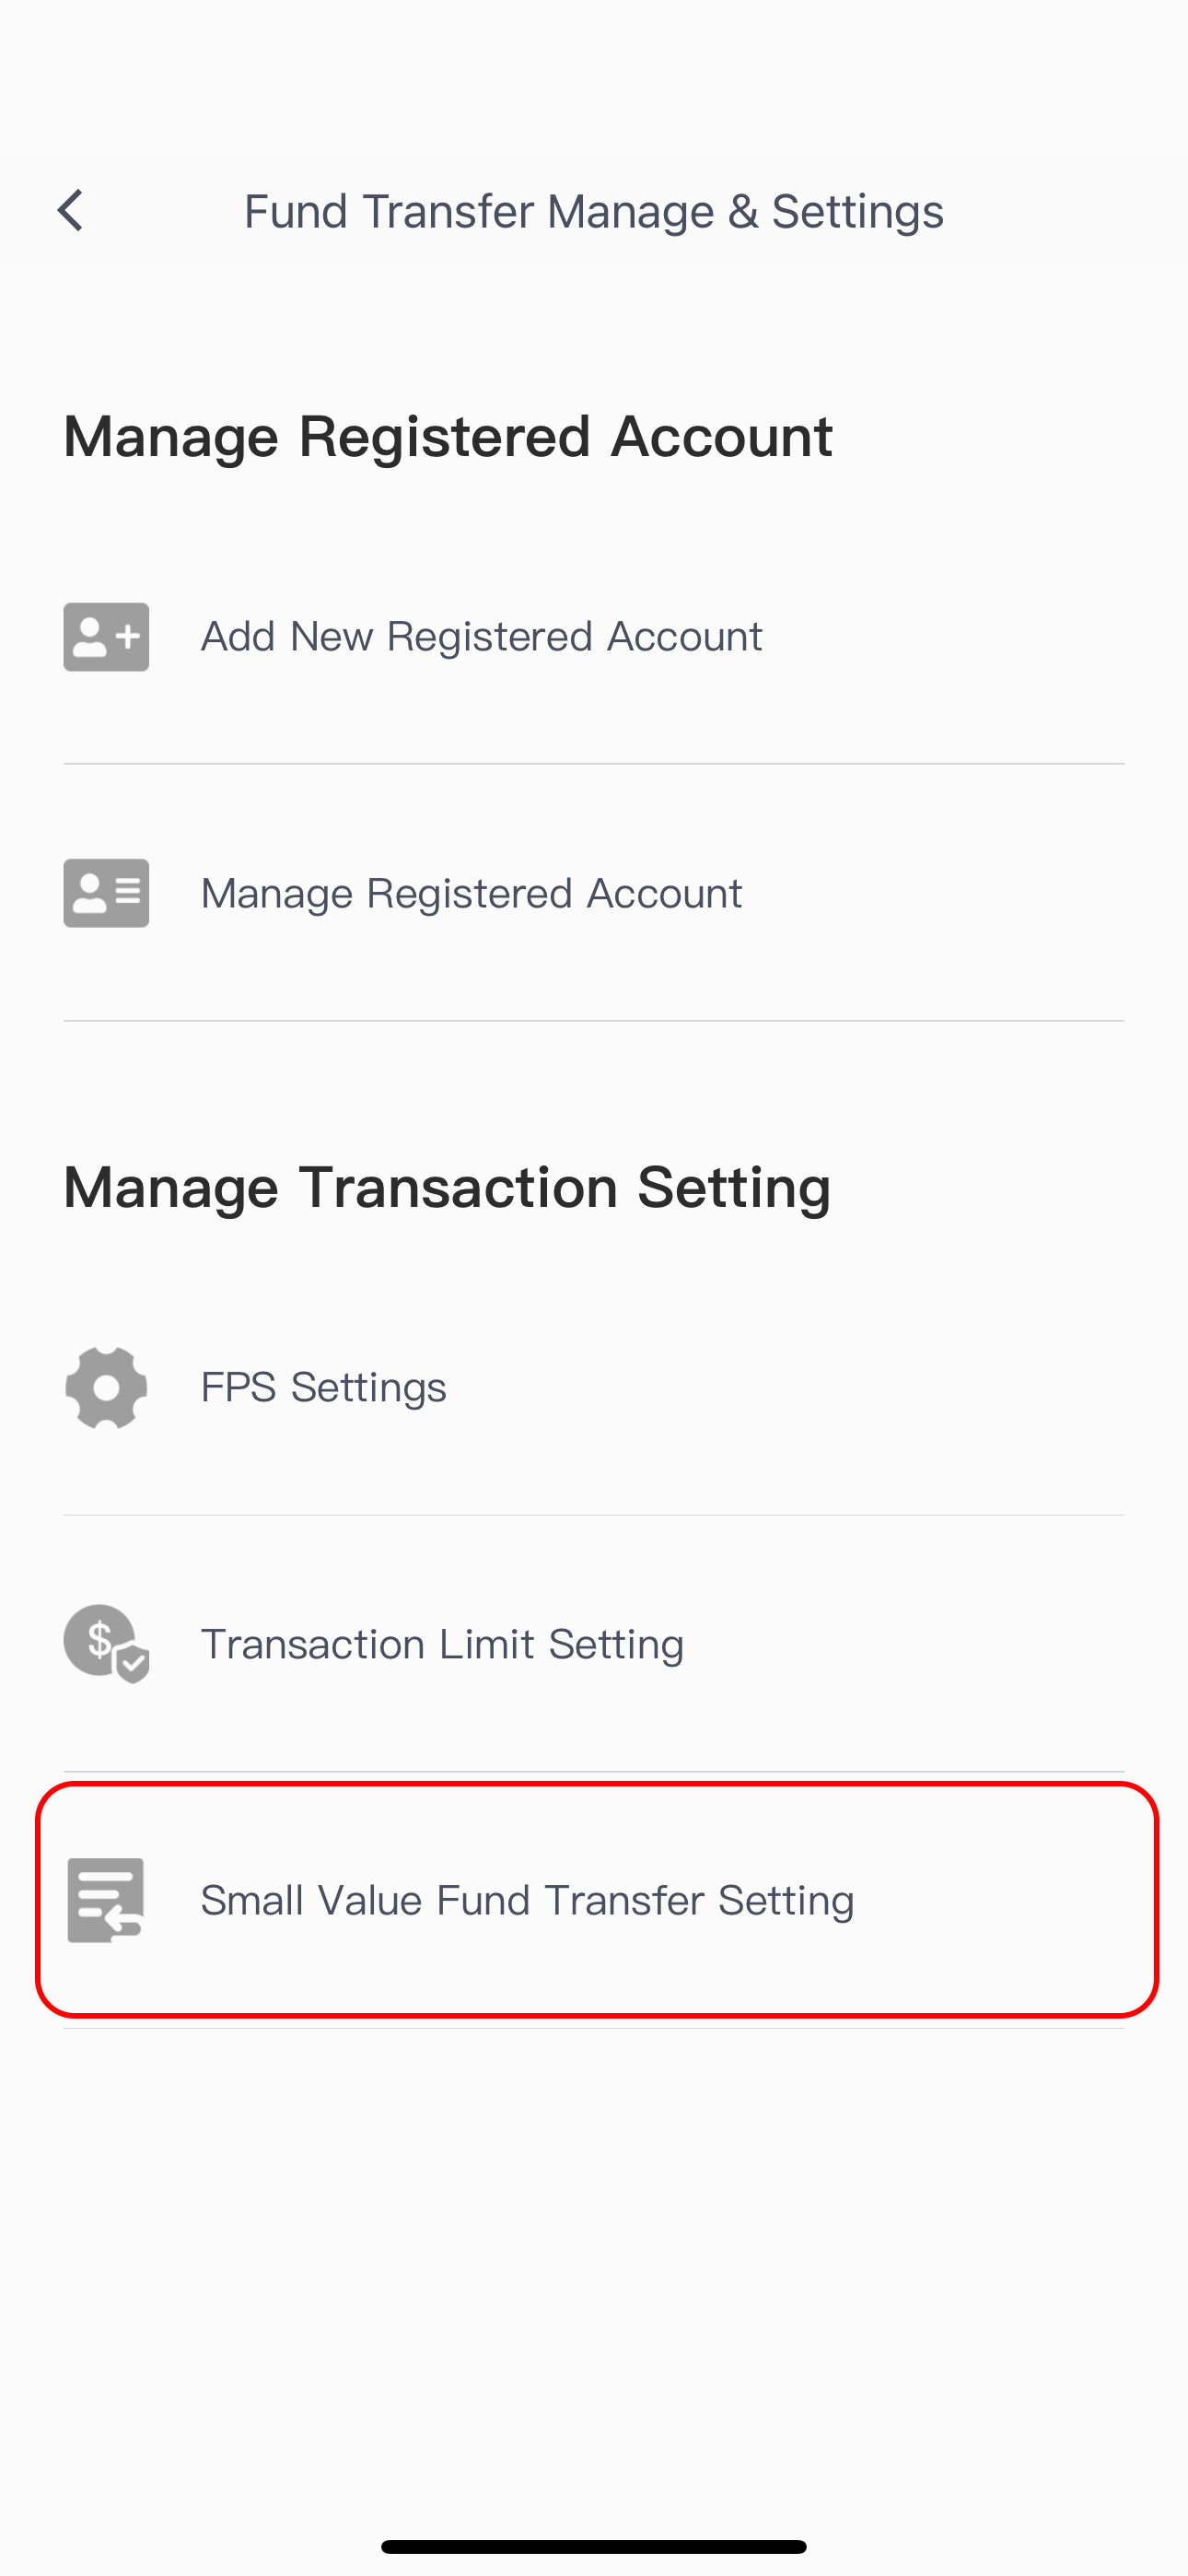 step 2, select 'small-value fund transfer settings' to register small-value fund transfer service and set up the daily transfer limit.